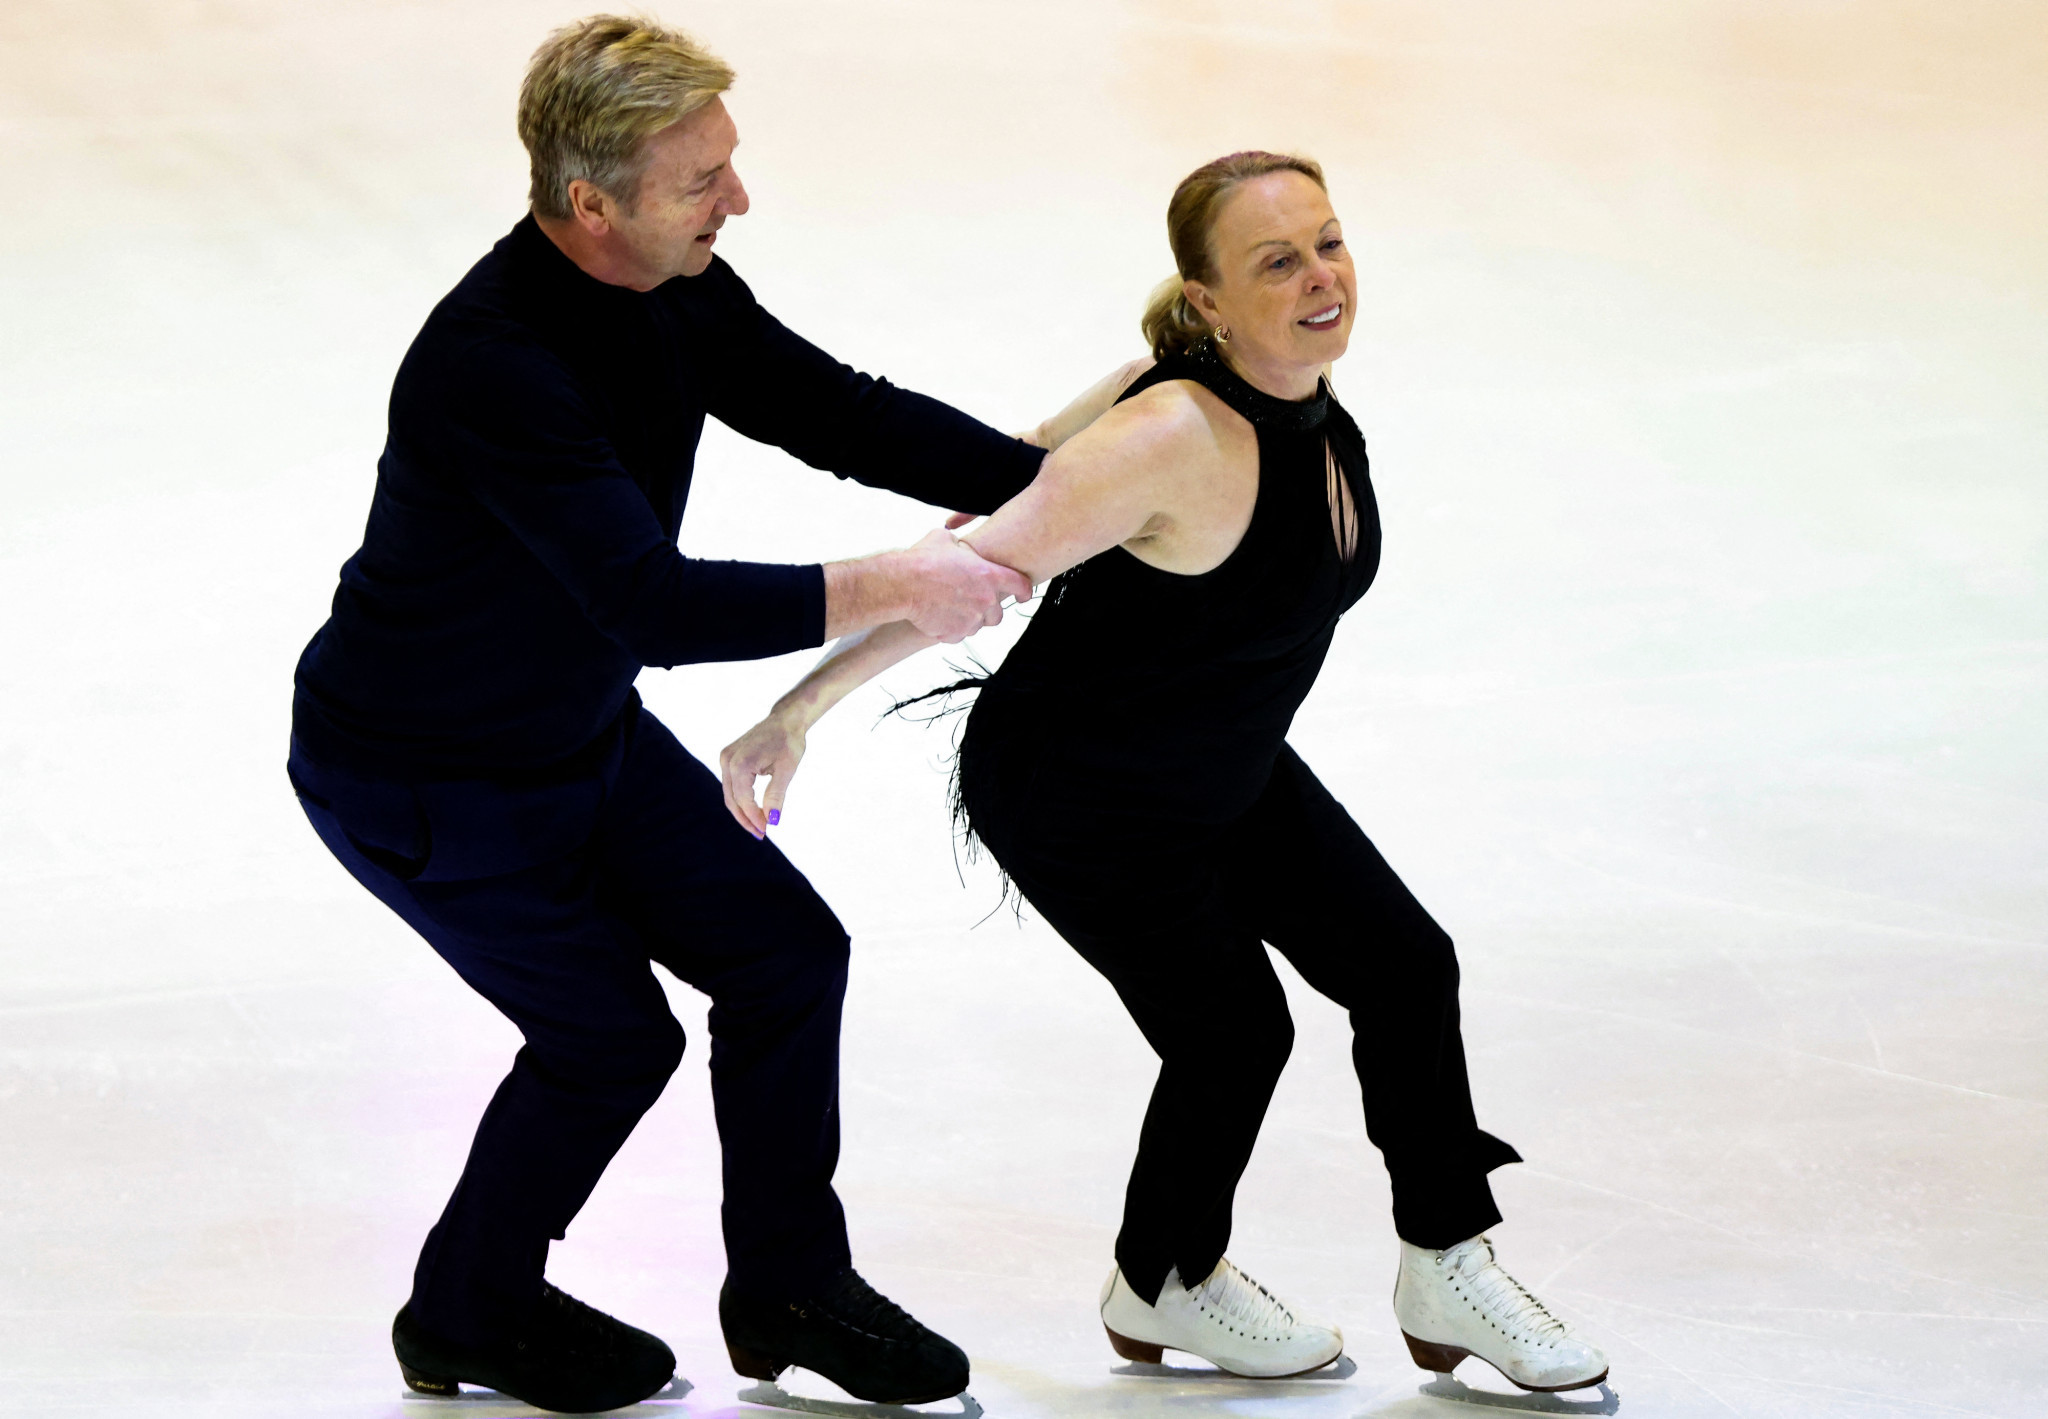 British legends Torvill and Dean return to Sarajevo 40 years after the Olympics